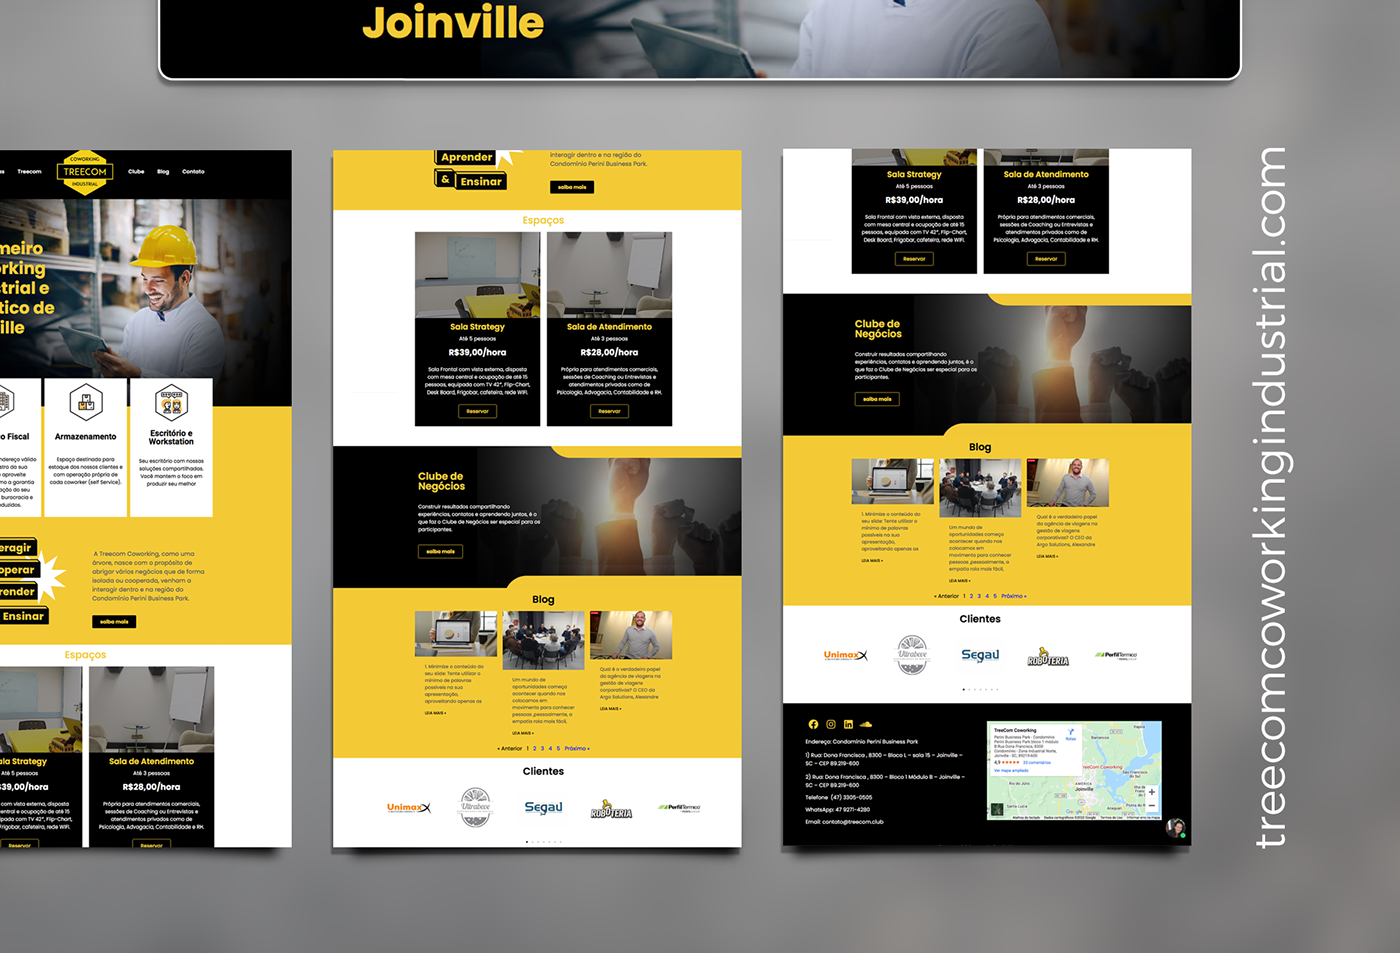 2022 design identidade visual joinville landing page Layout redesign site Website wireframe